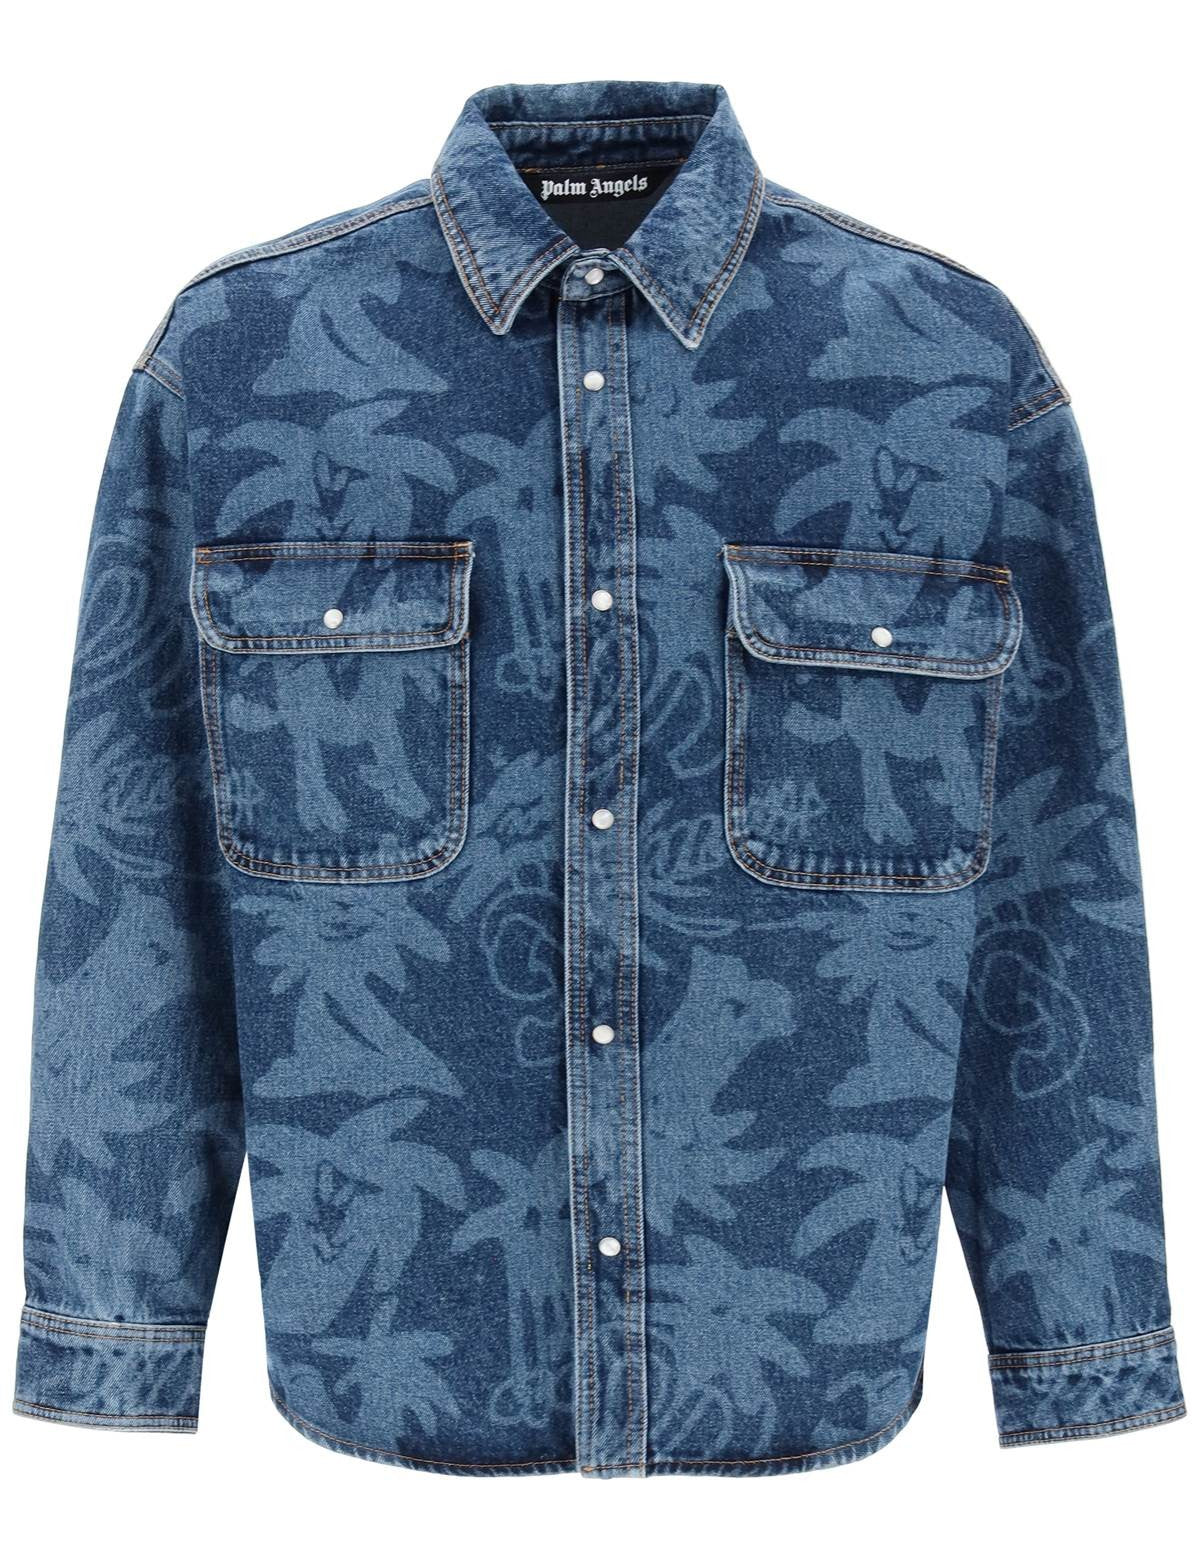 palm-angels-palmity-overshirt-in-denim-with-laser-print-all-over.jpg